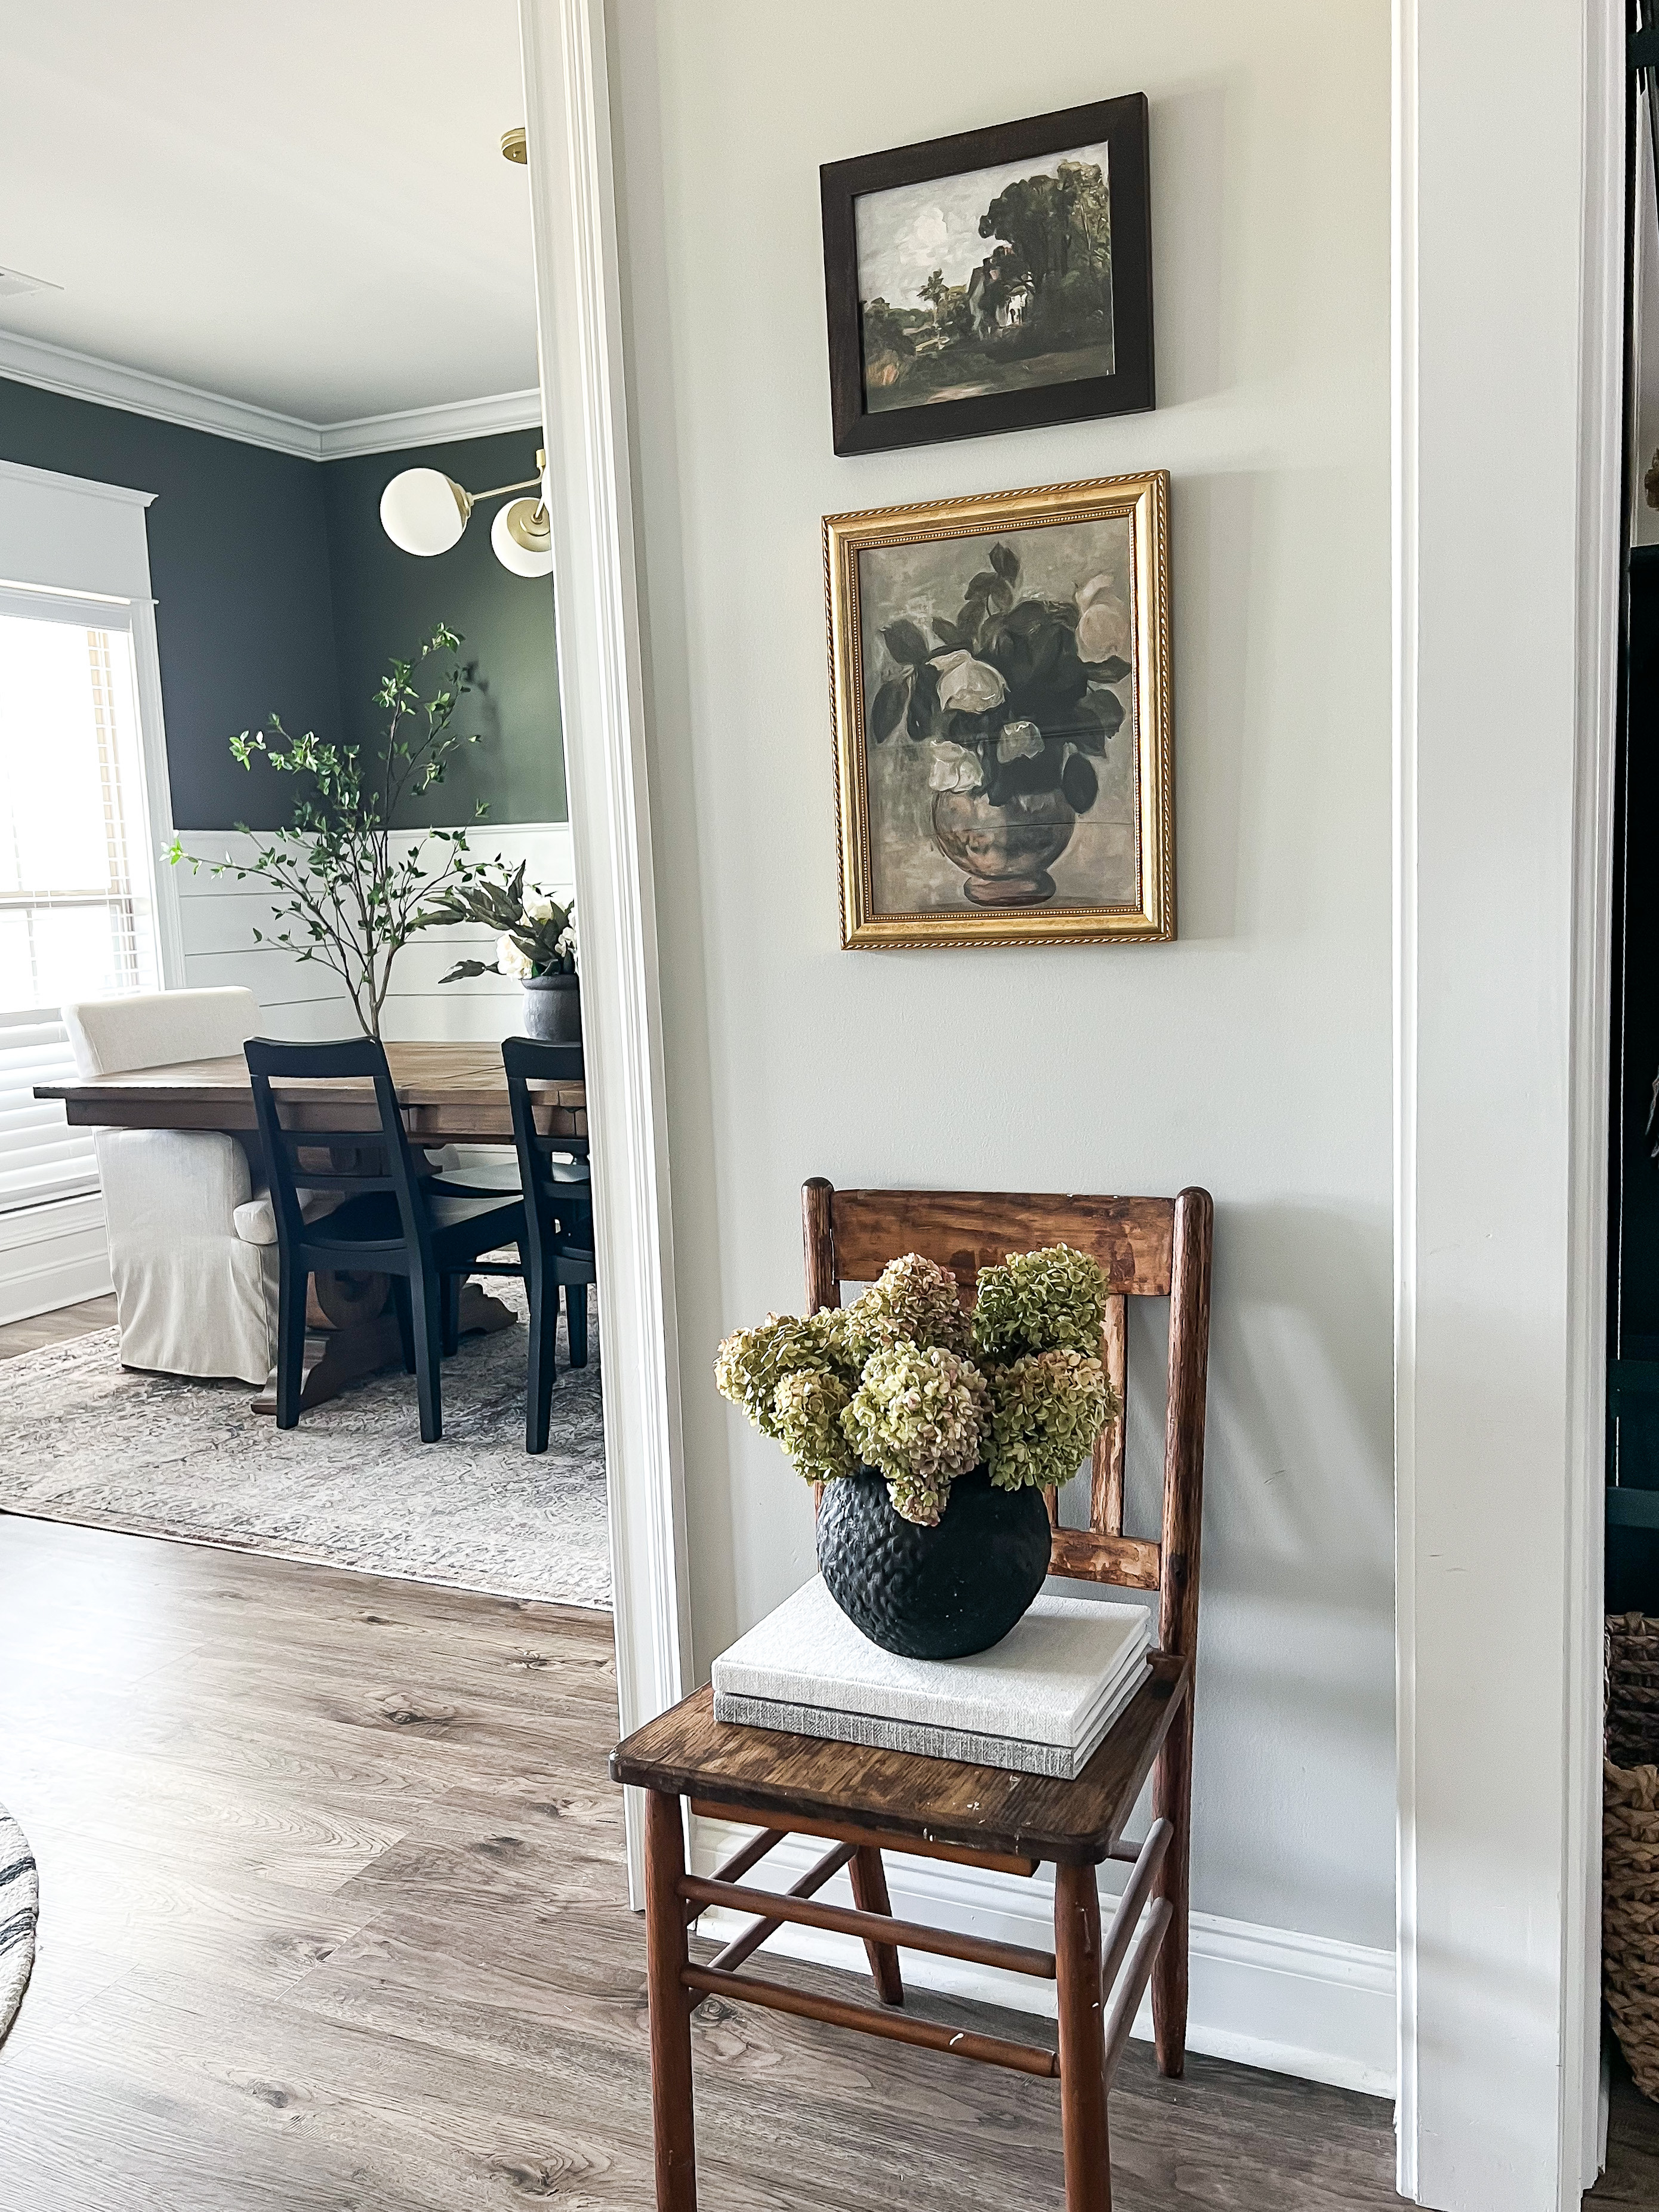 Decor Dilemma: A small hallway space with two different frames.